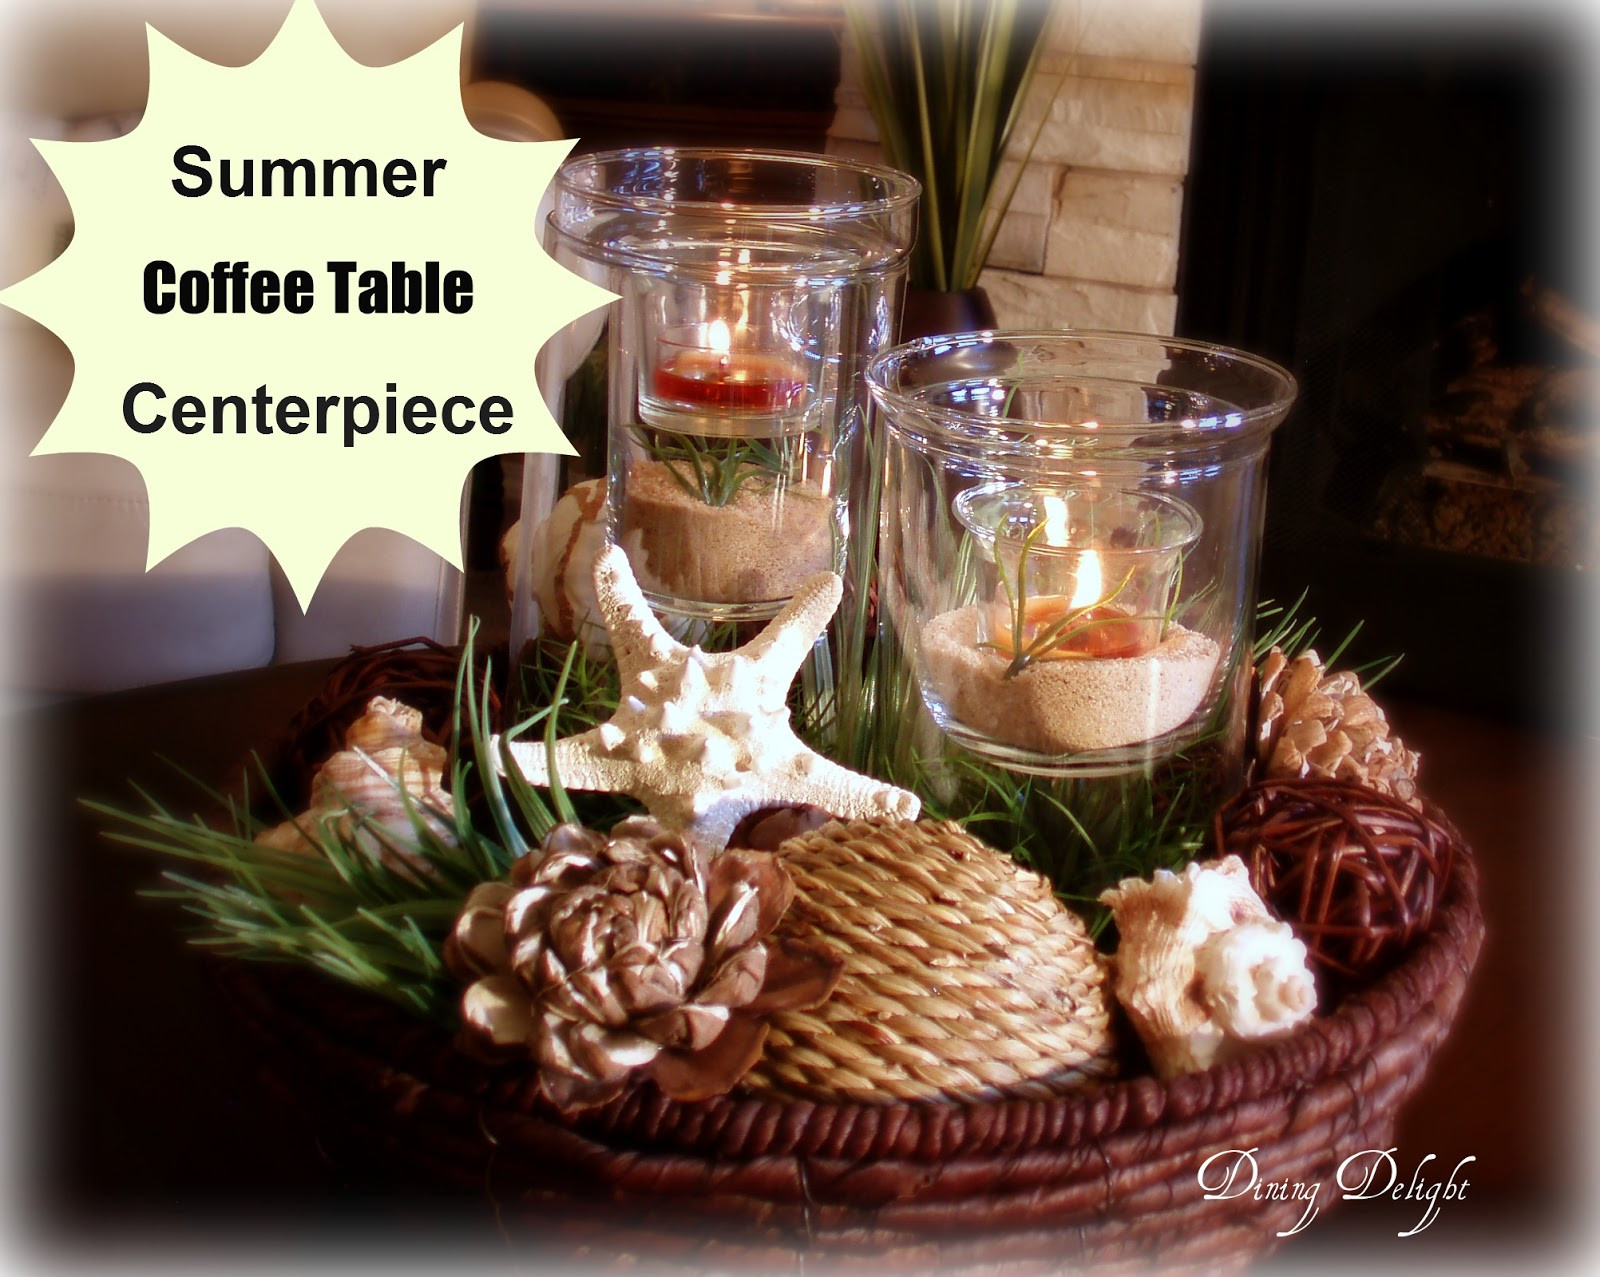 Best ideas about Coffee Table Centerpiece
. Save or Pin Dining Delight Summer Centerpiece for the Coffee Table Now.